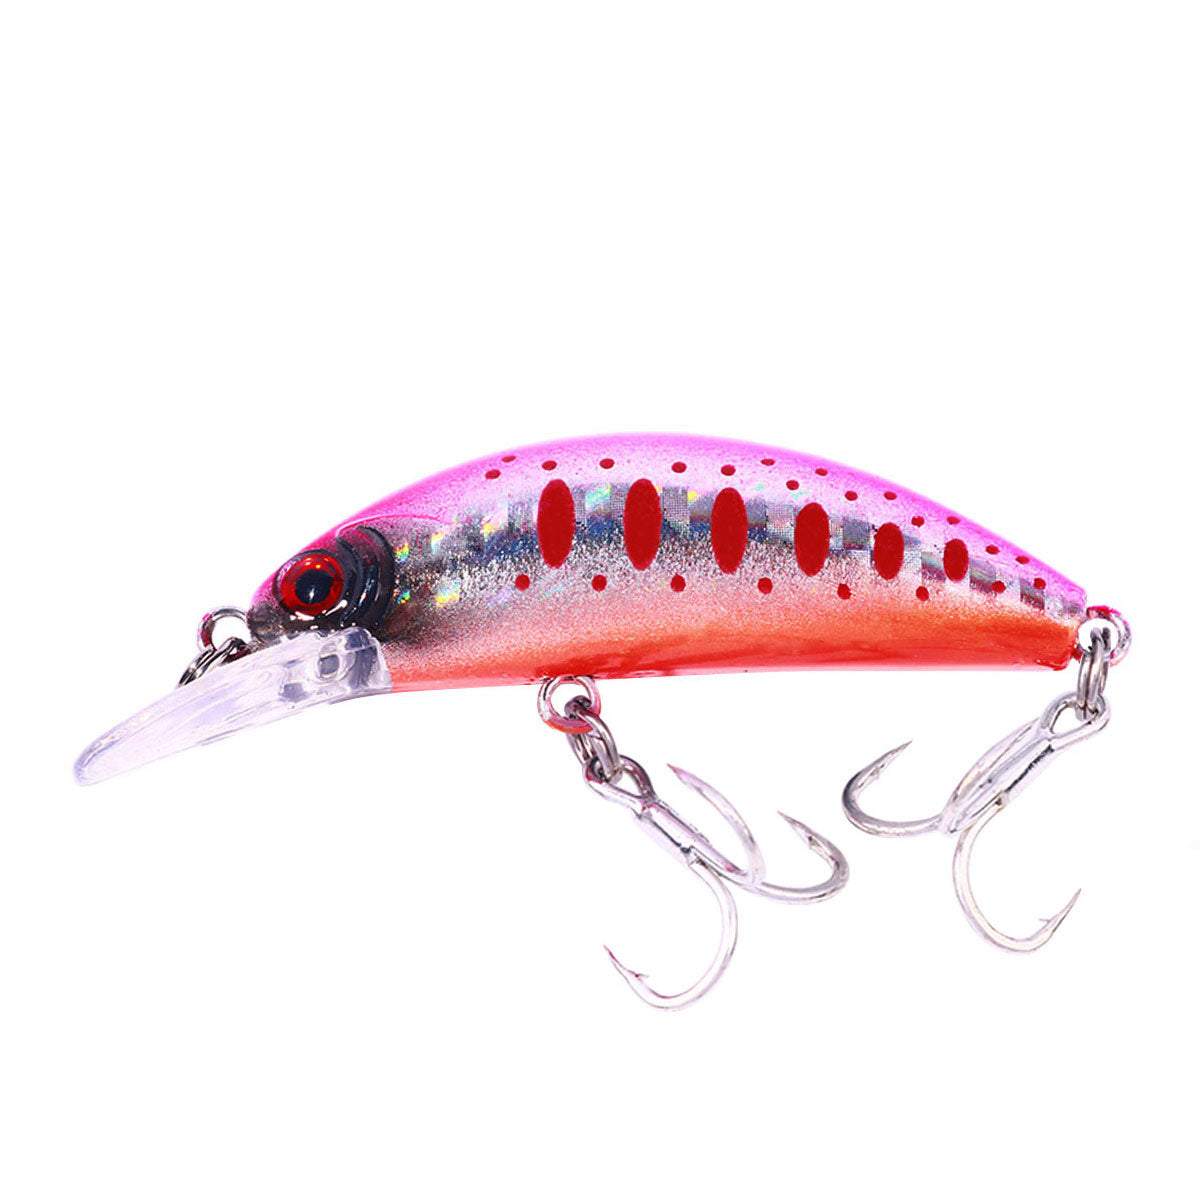 3.74'' 4.72'' Slow Sinking Minnow Lures Hard Plastic for Bass